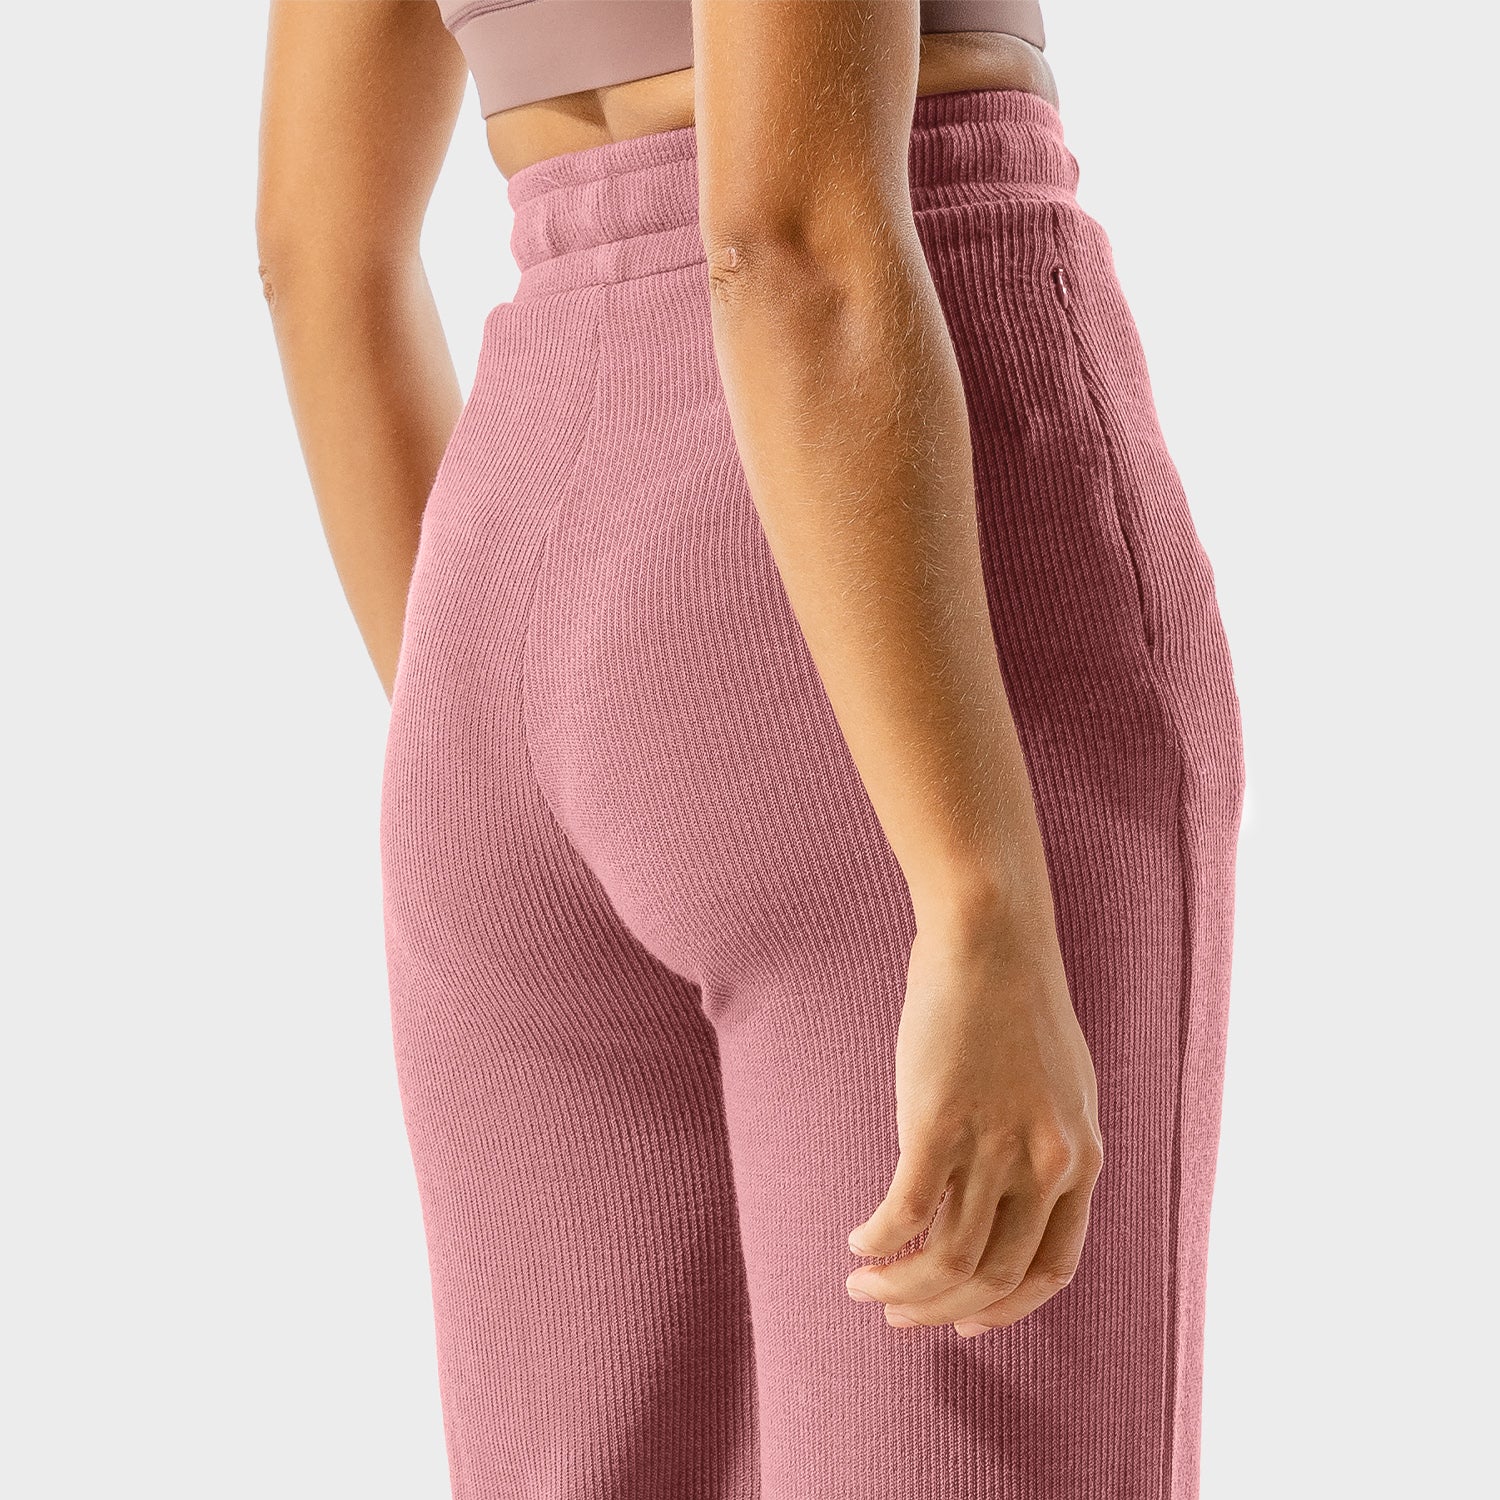 squatwolf-gym-pants-for-women-luxe-wide-leg-pants-baby-pink-workout-clothes